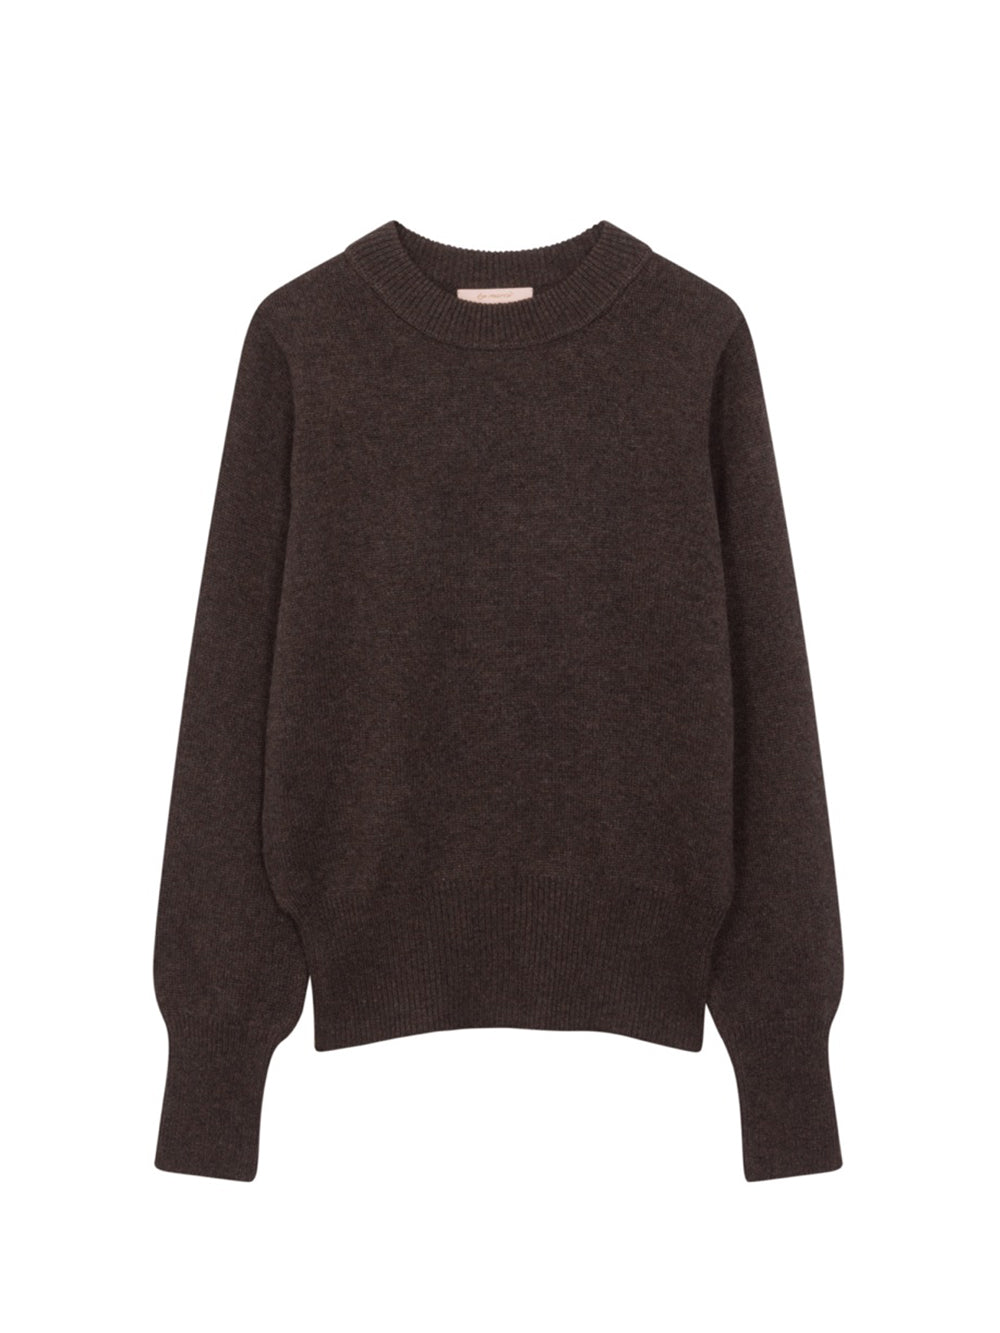 COUTURE SWEATER CASHMERE